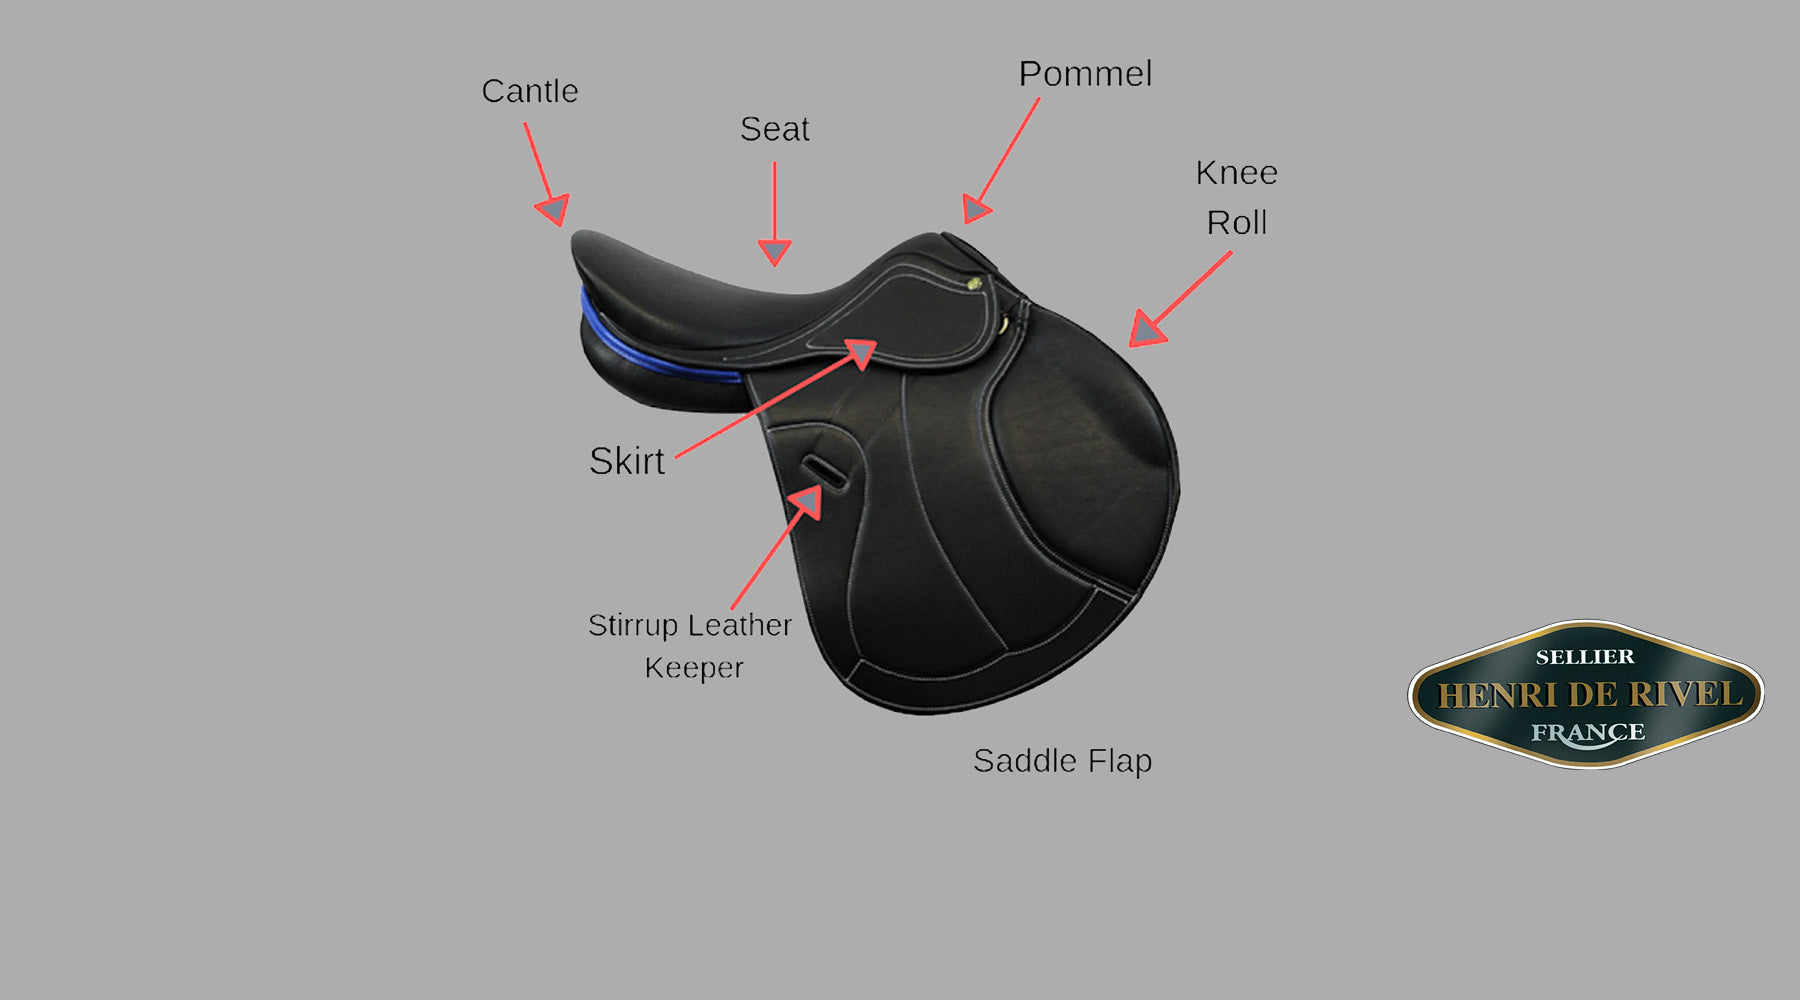 Guide to parts and functions of the English Saddle